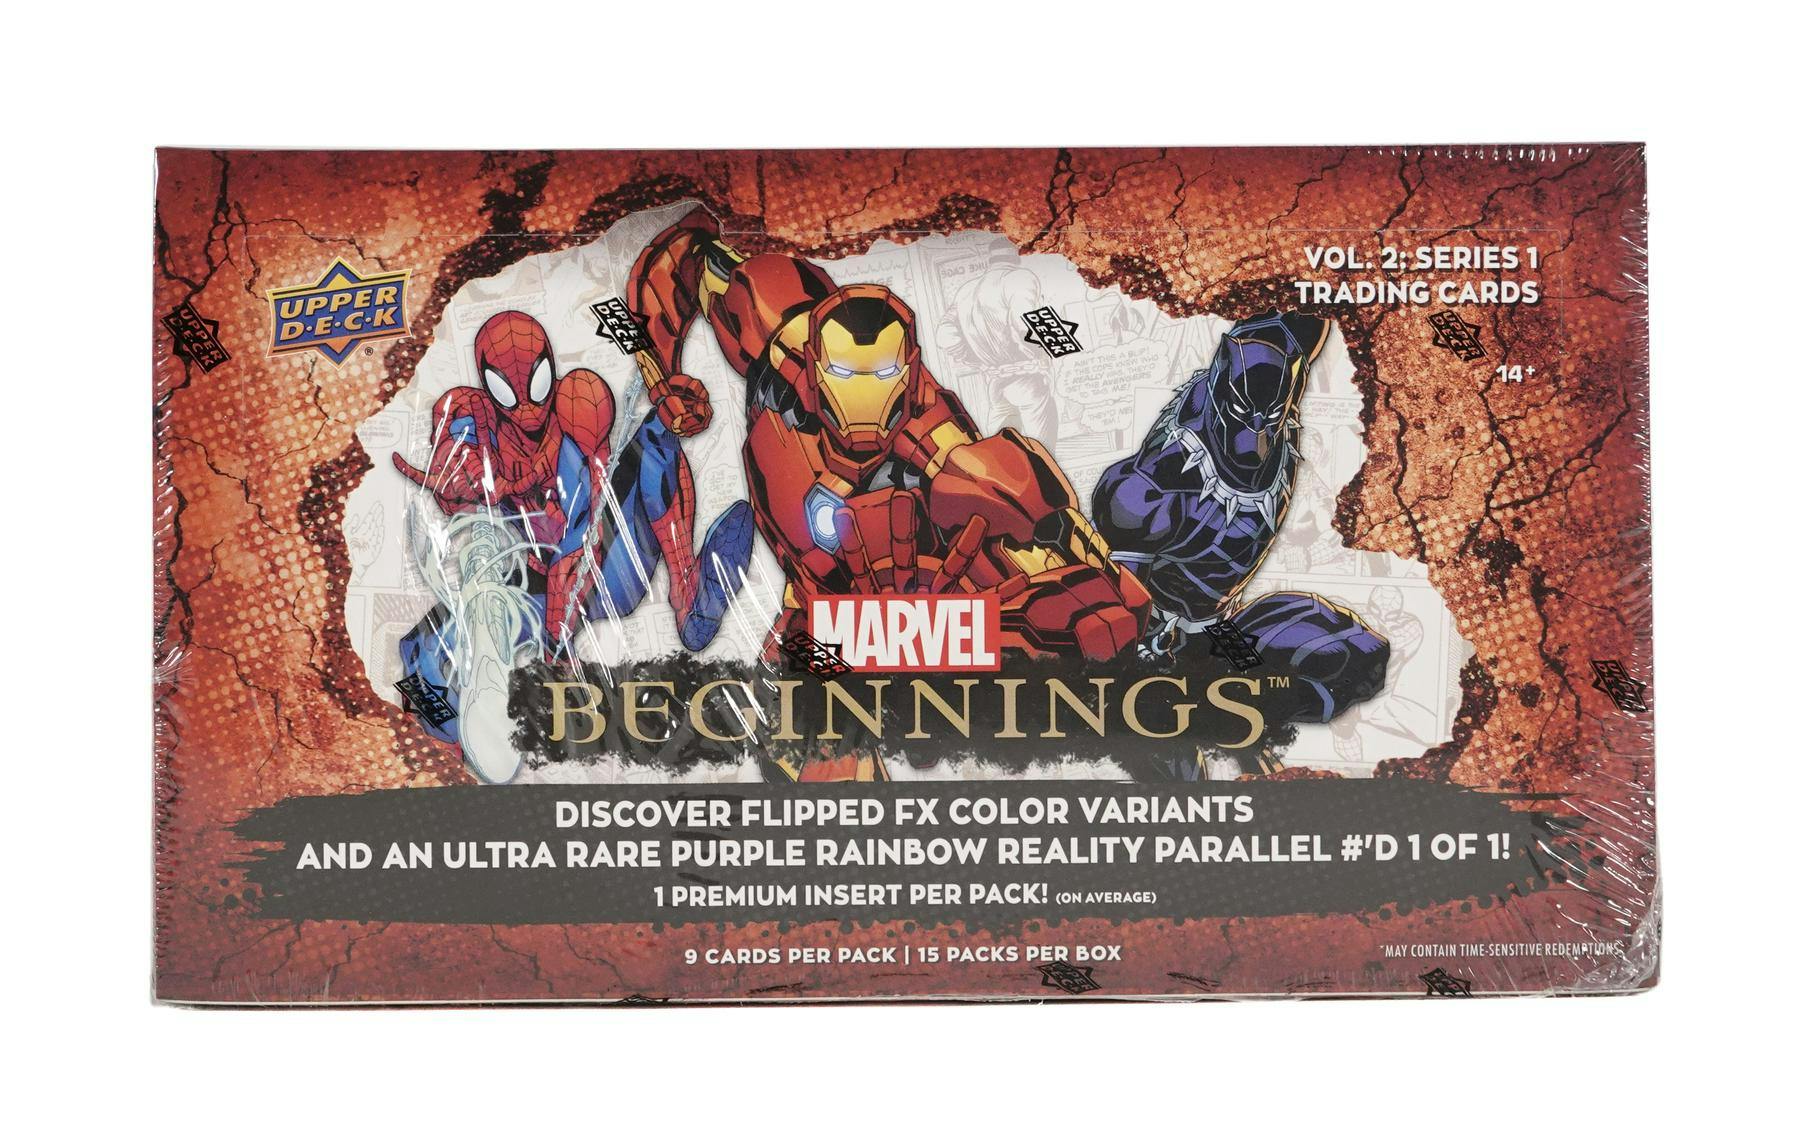 PANINI 1 BINDER MARVEL VERSUS 2022 + 2 PACKETS TRADING CARDS + 1